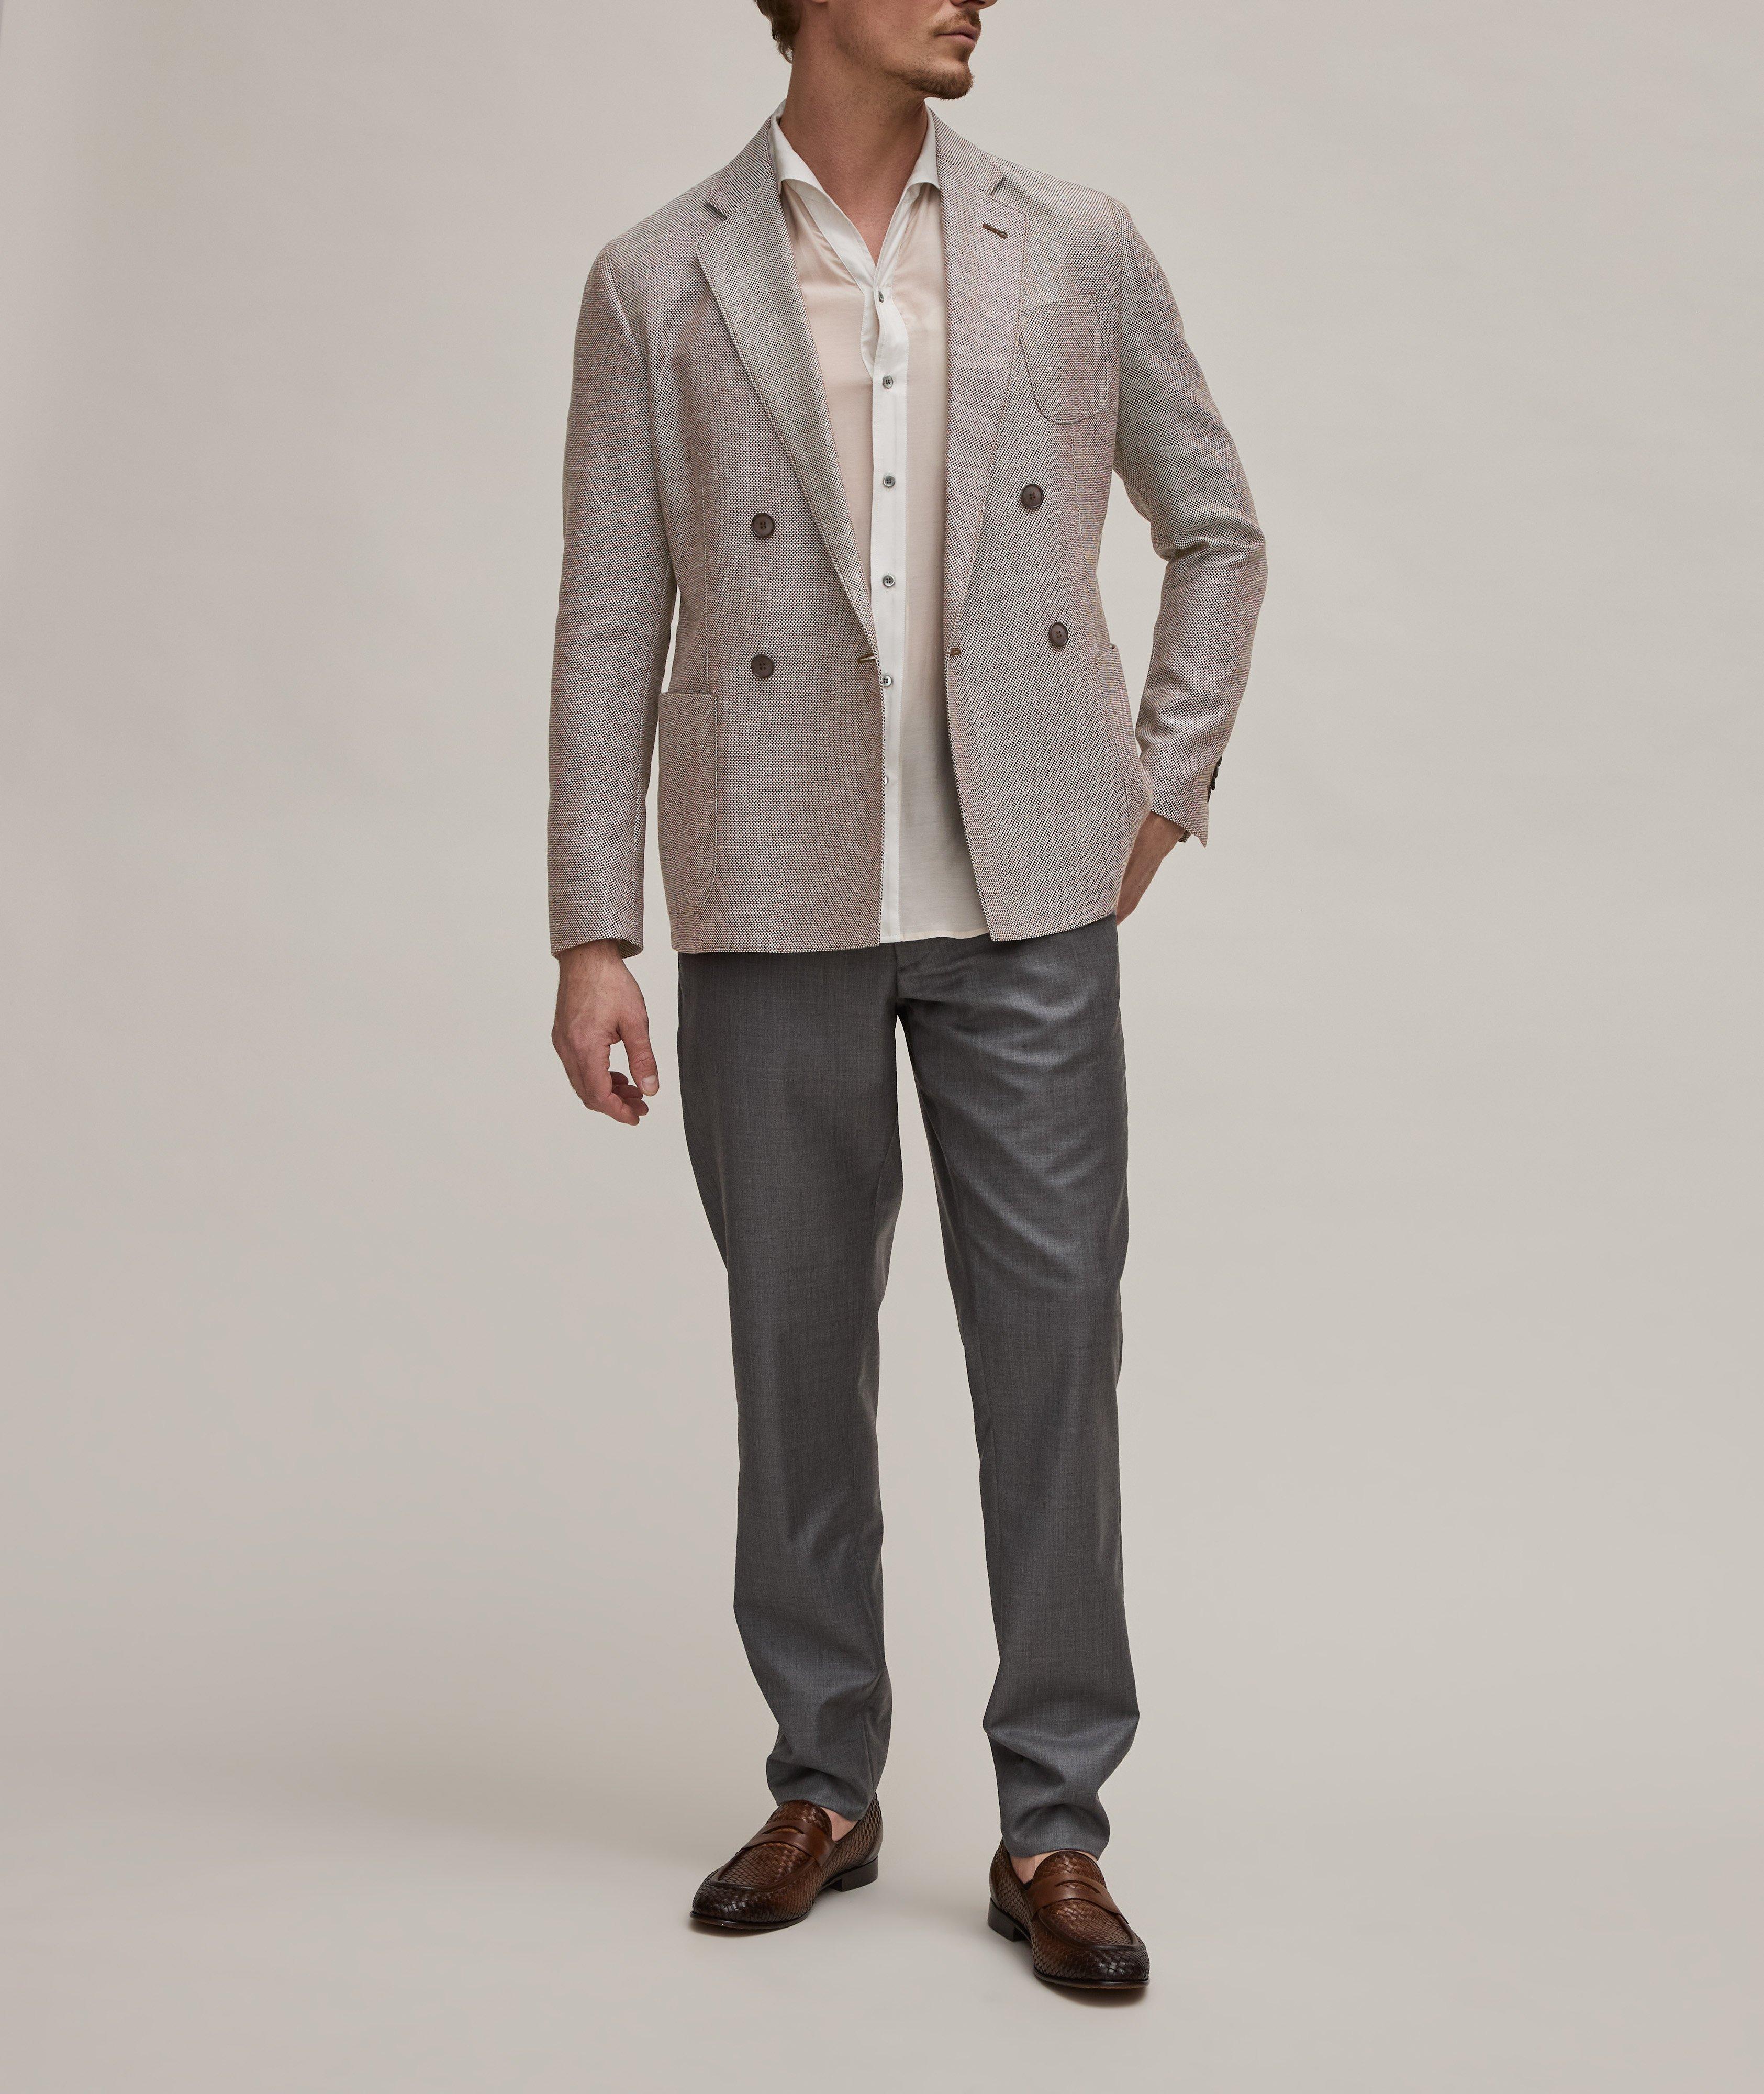 Upton Collection Jacquard Checkered Double-Breasted Wool-Blend Sport Jacket image 8